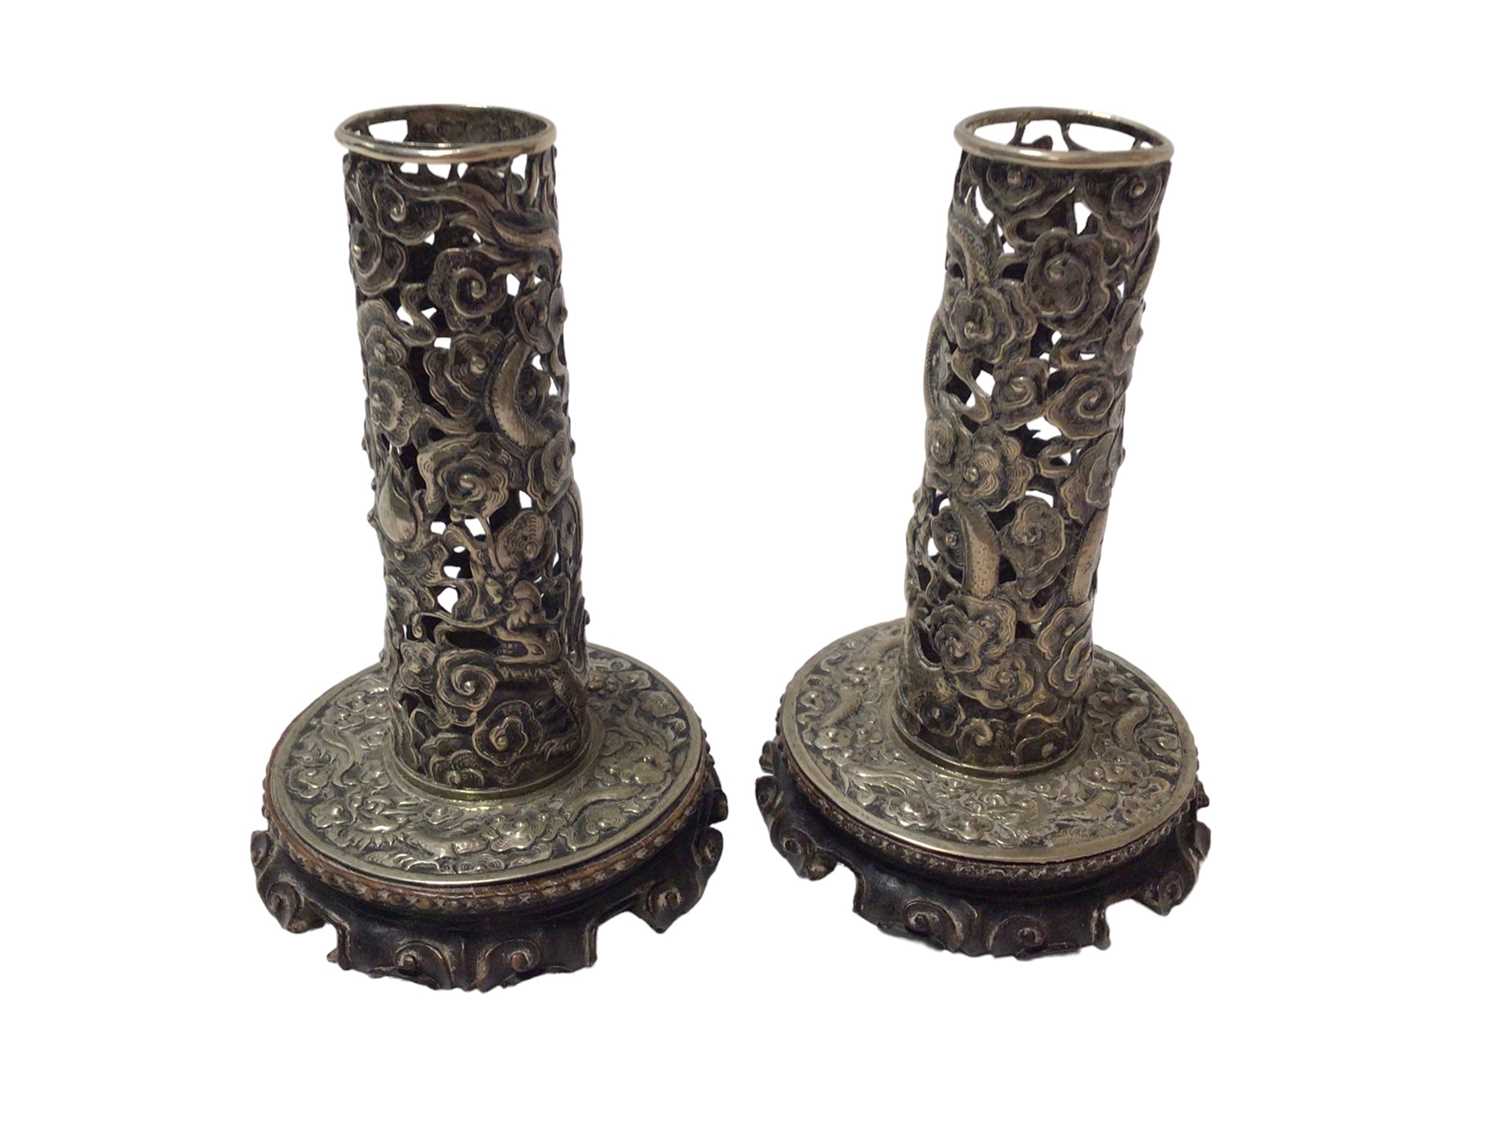 Pair of Chinese white metal candlesticks with pierced dragon decoration on carved wood bases - Image 2 of 6